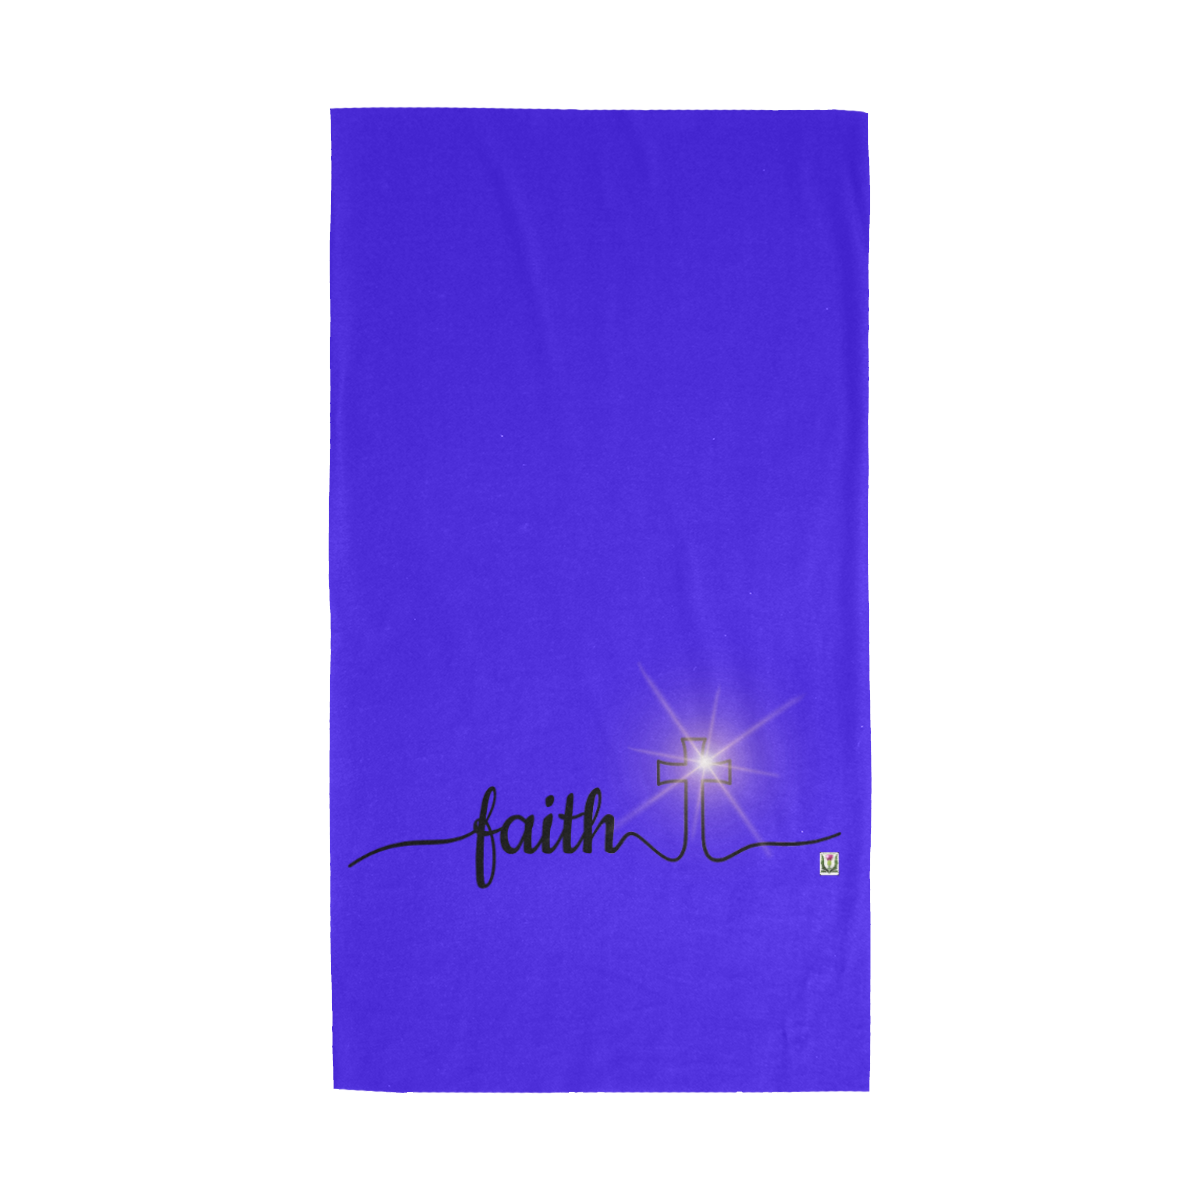 Fairlings Delight's The Word Collection- Faith 53086d7 Multifunctional Headwear